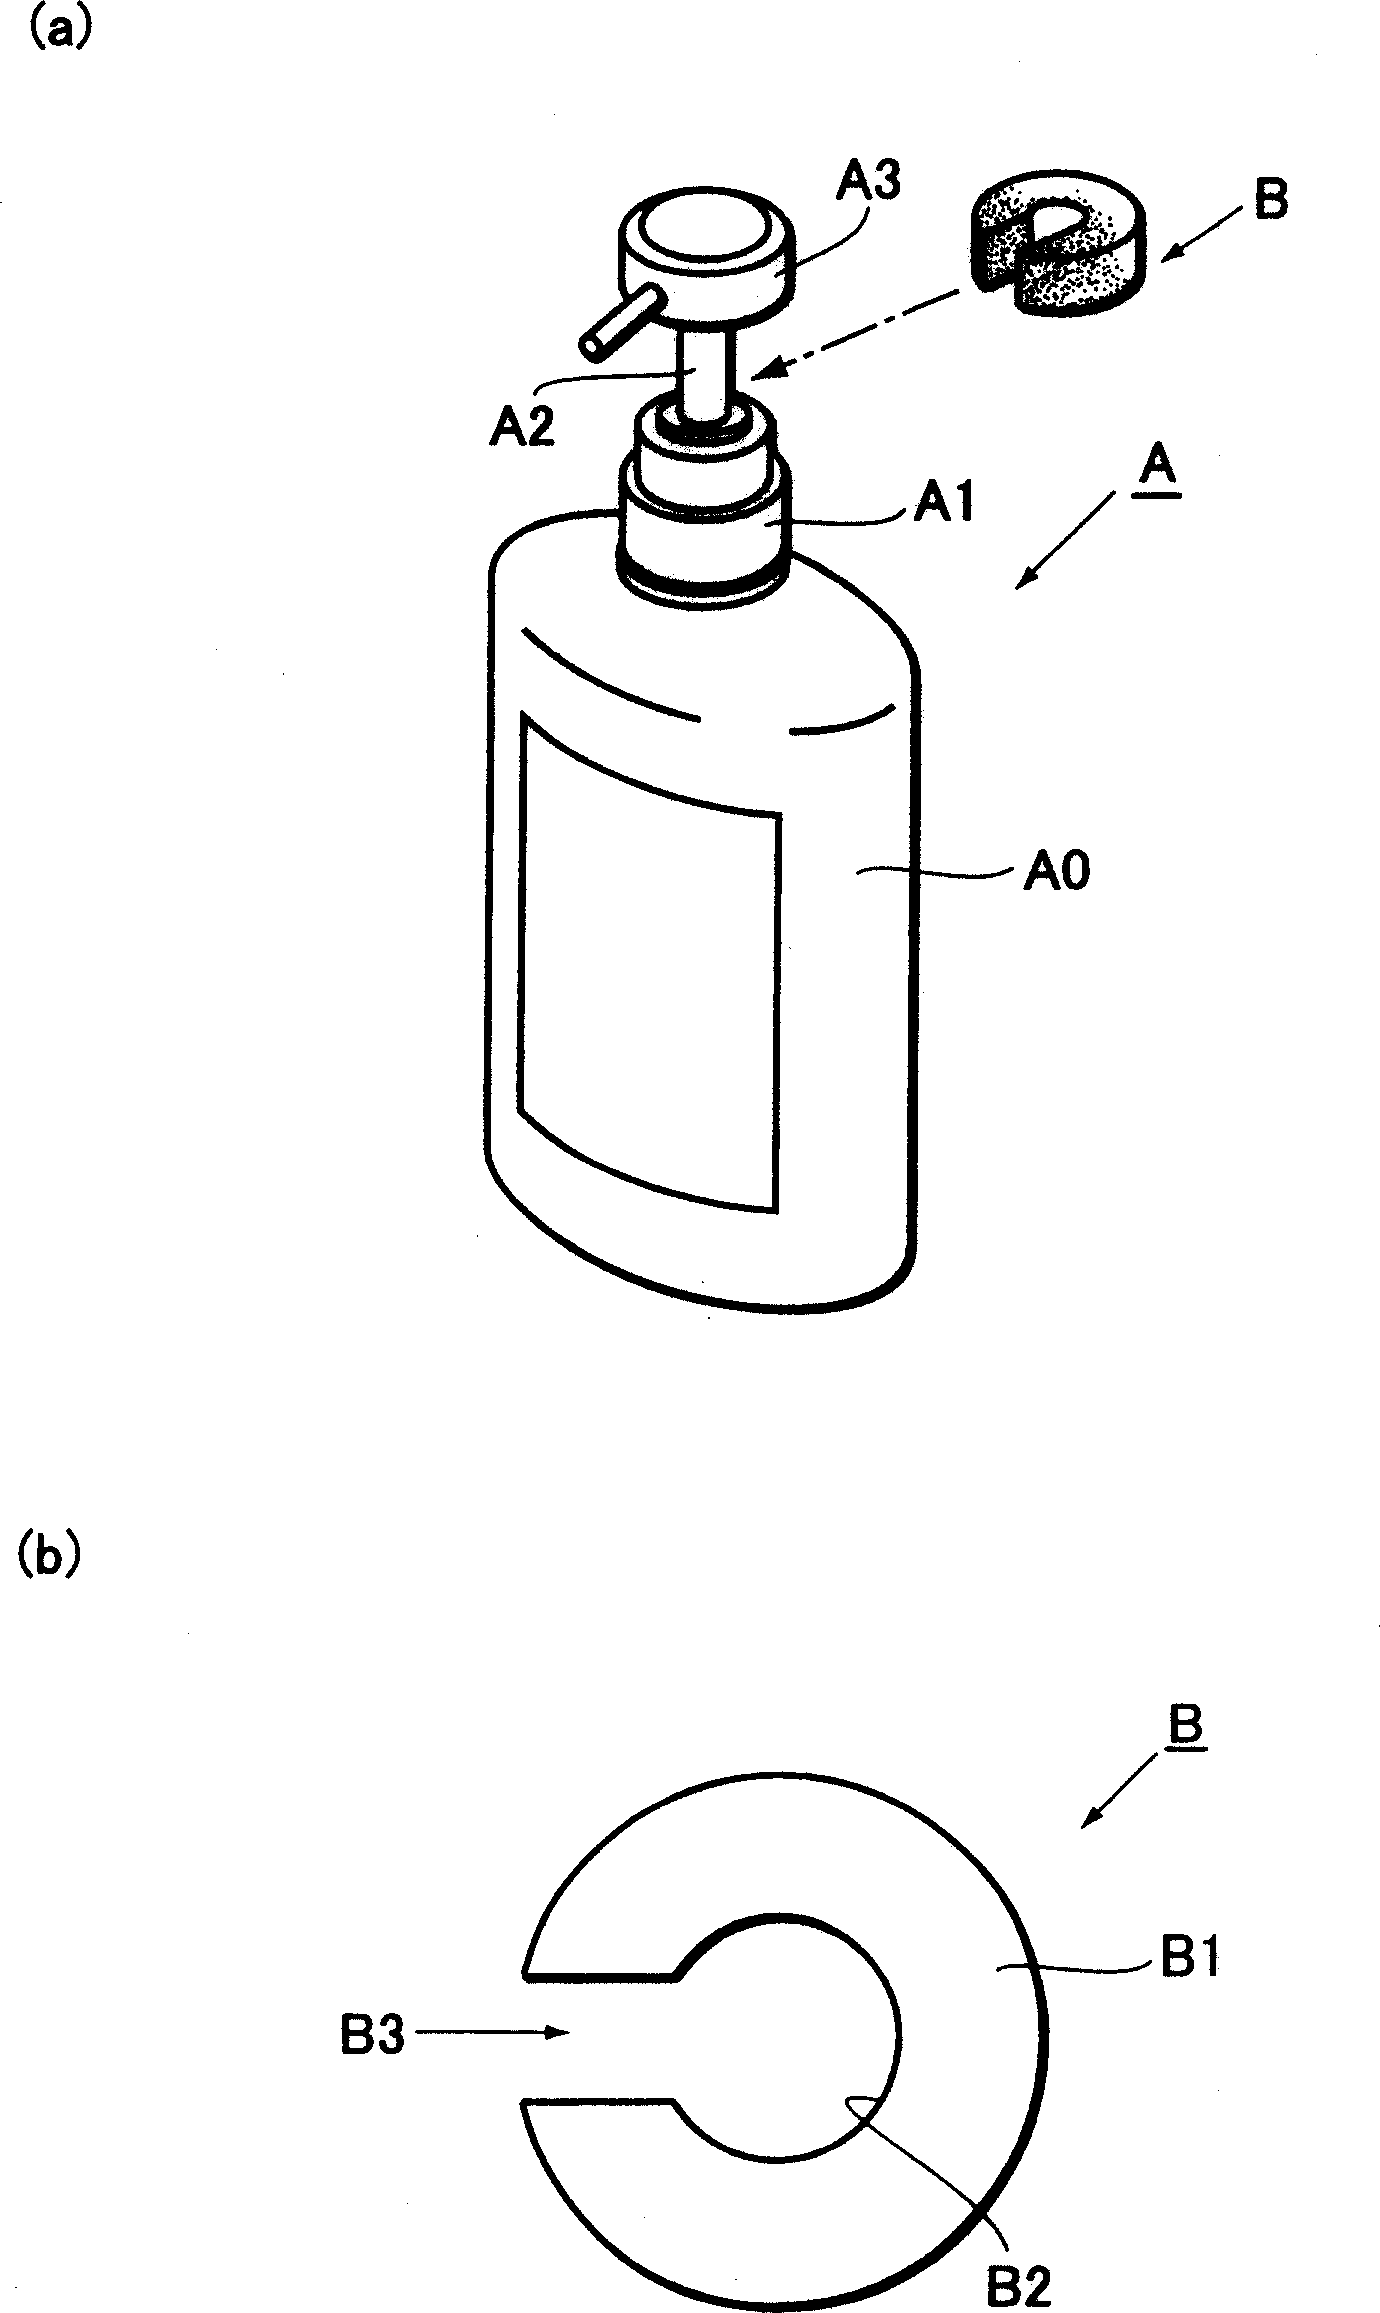 Discharge-amount limiting tool for pumping liquid container